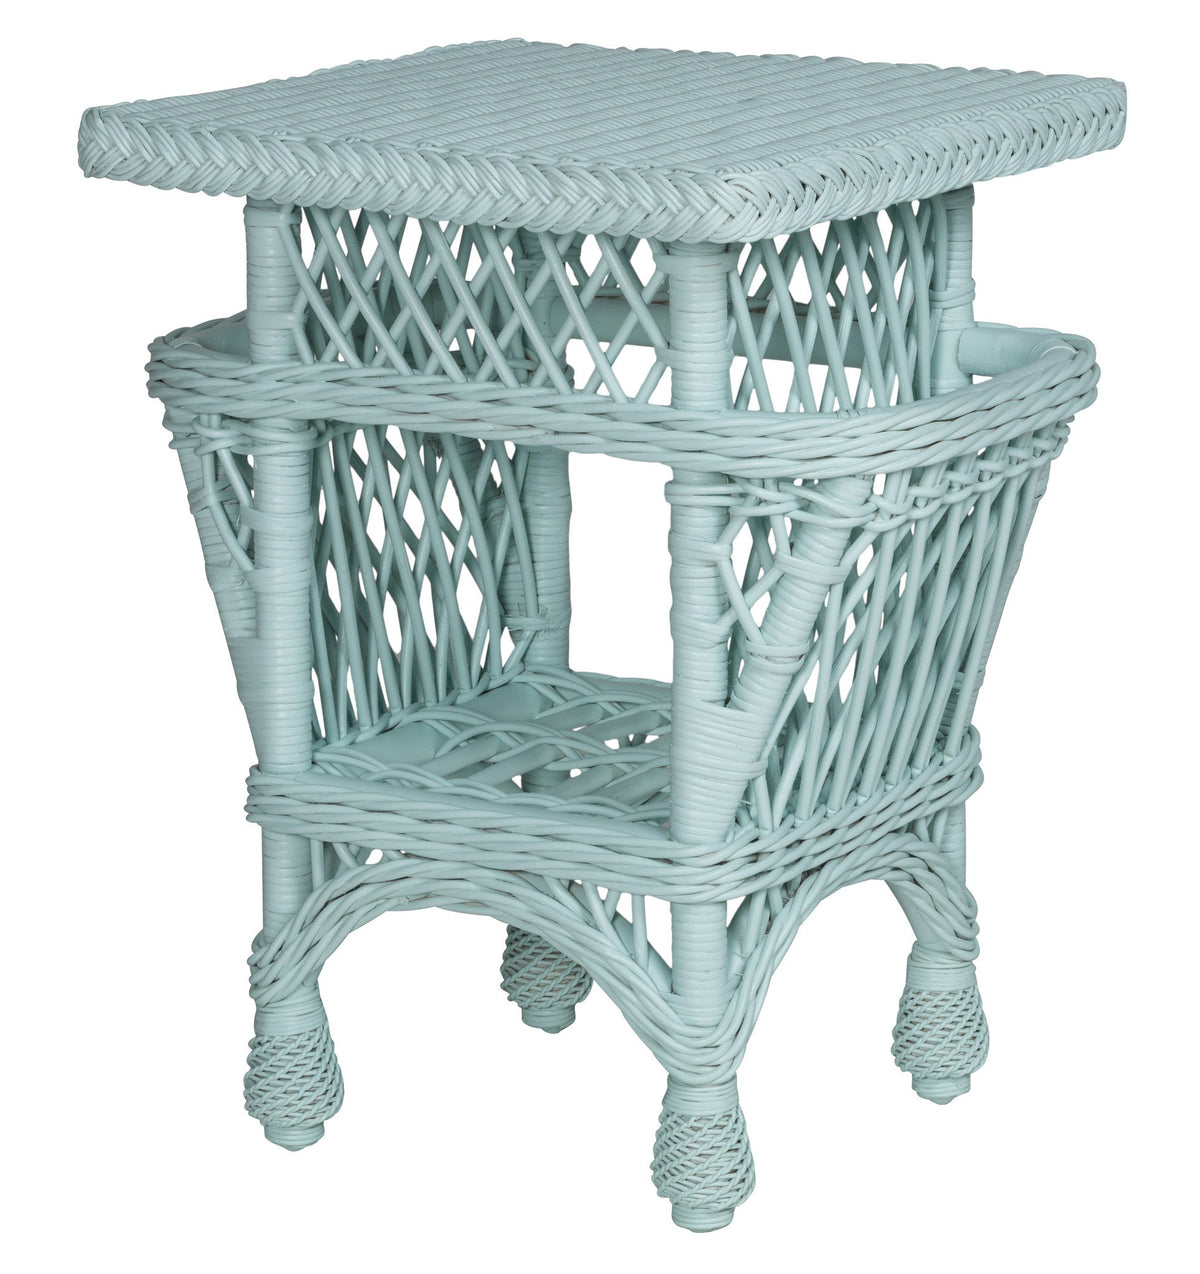 Designer Wicker &amp; Rattan By Tribor Harbor Front Accent Table With Pockets Accessory - Rattan Imports